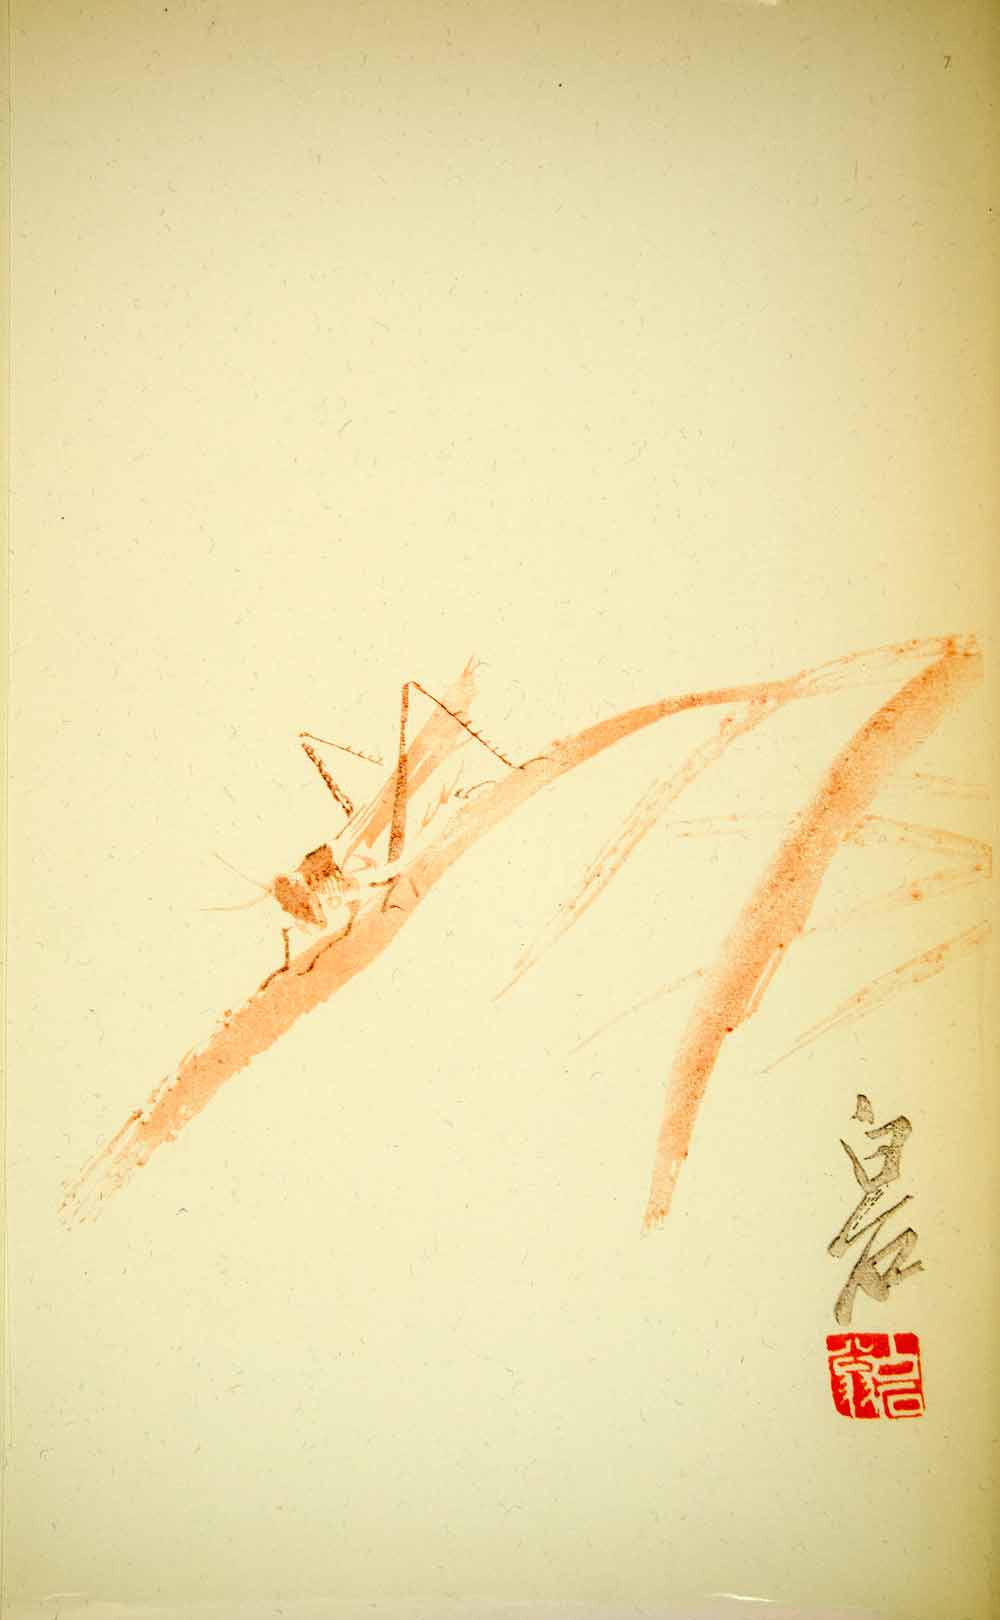 1953 Lithograph Grasshopper Reeds Chi Pai-Shih Chinese Art Bug Insect Orange - Period Paper
